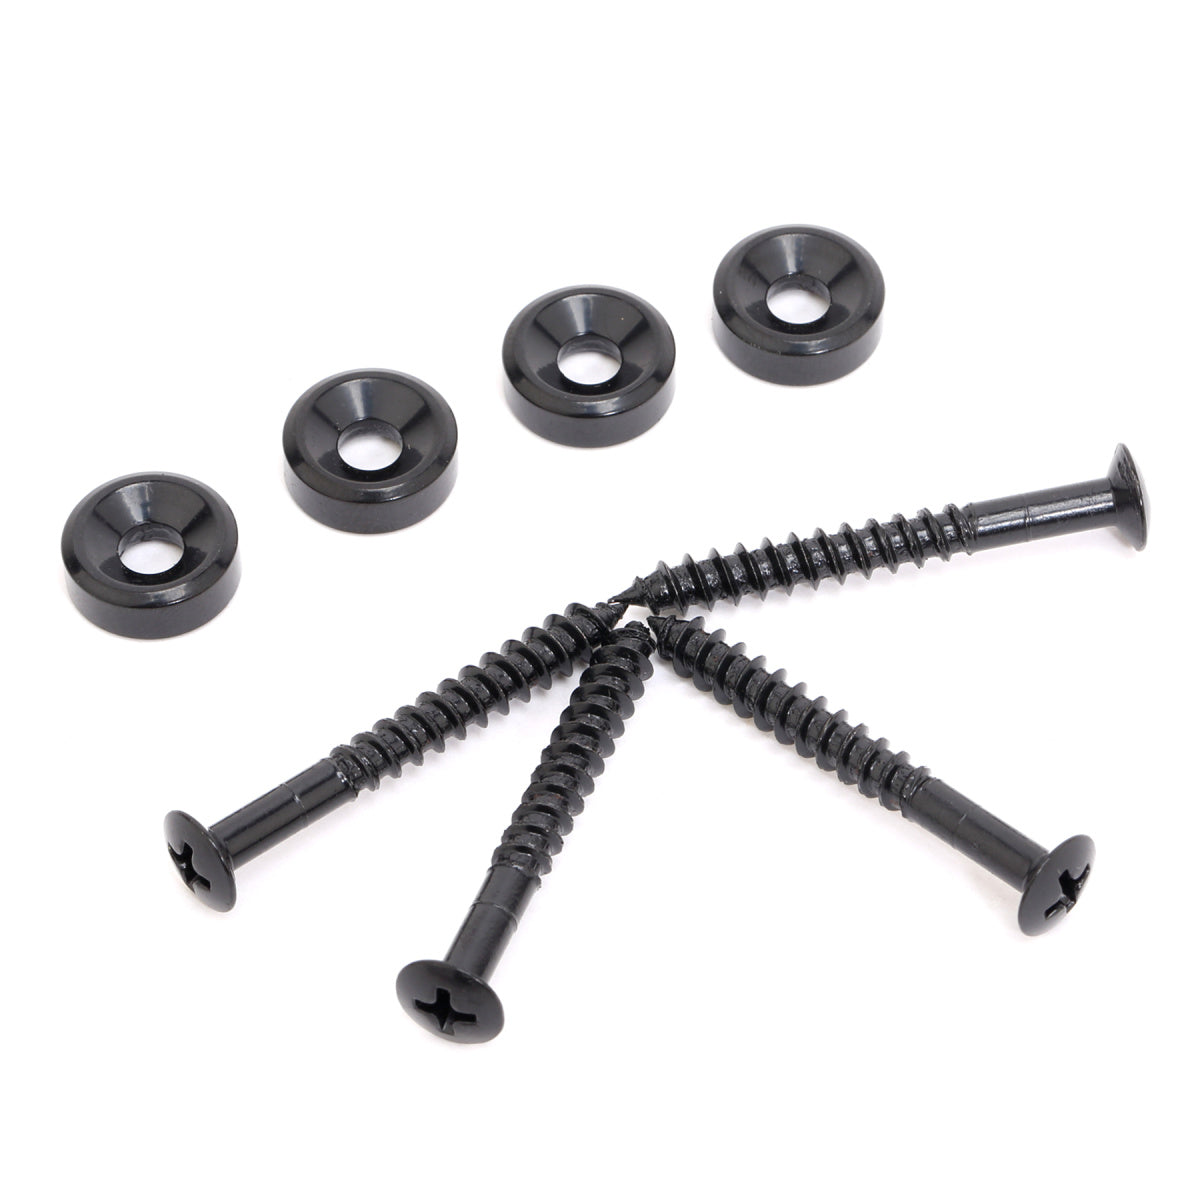 Musiclily Electric Guitar Bass Neck Joint Bushings & Bolts,Black (4 Pieces)